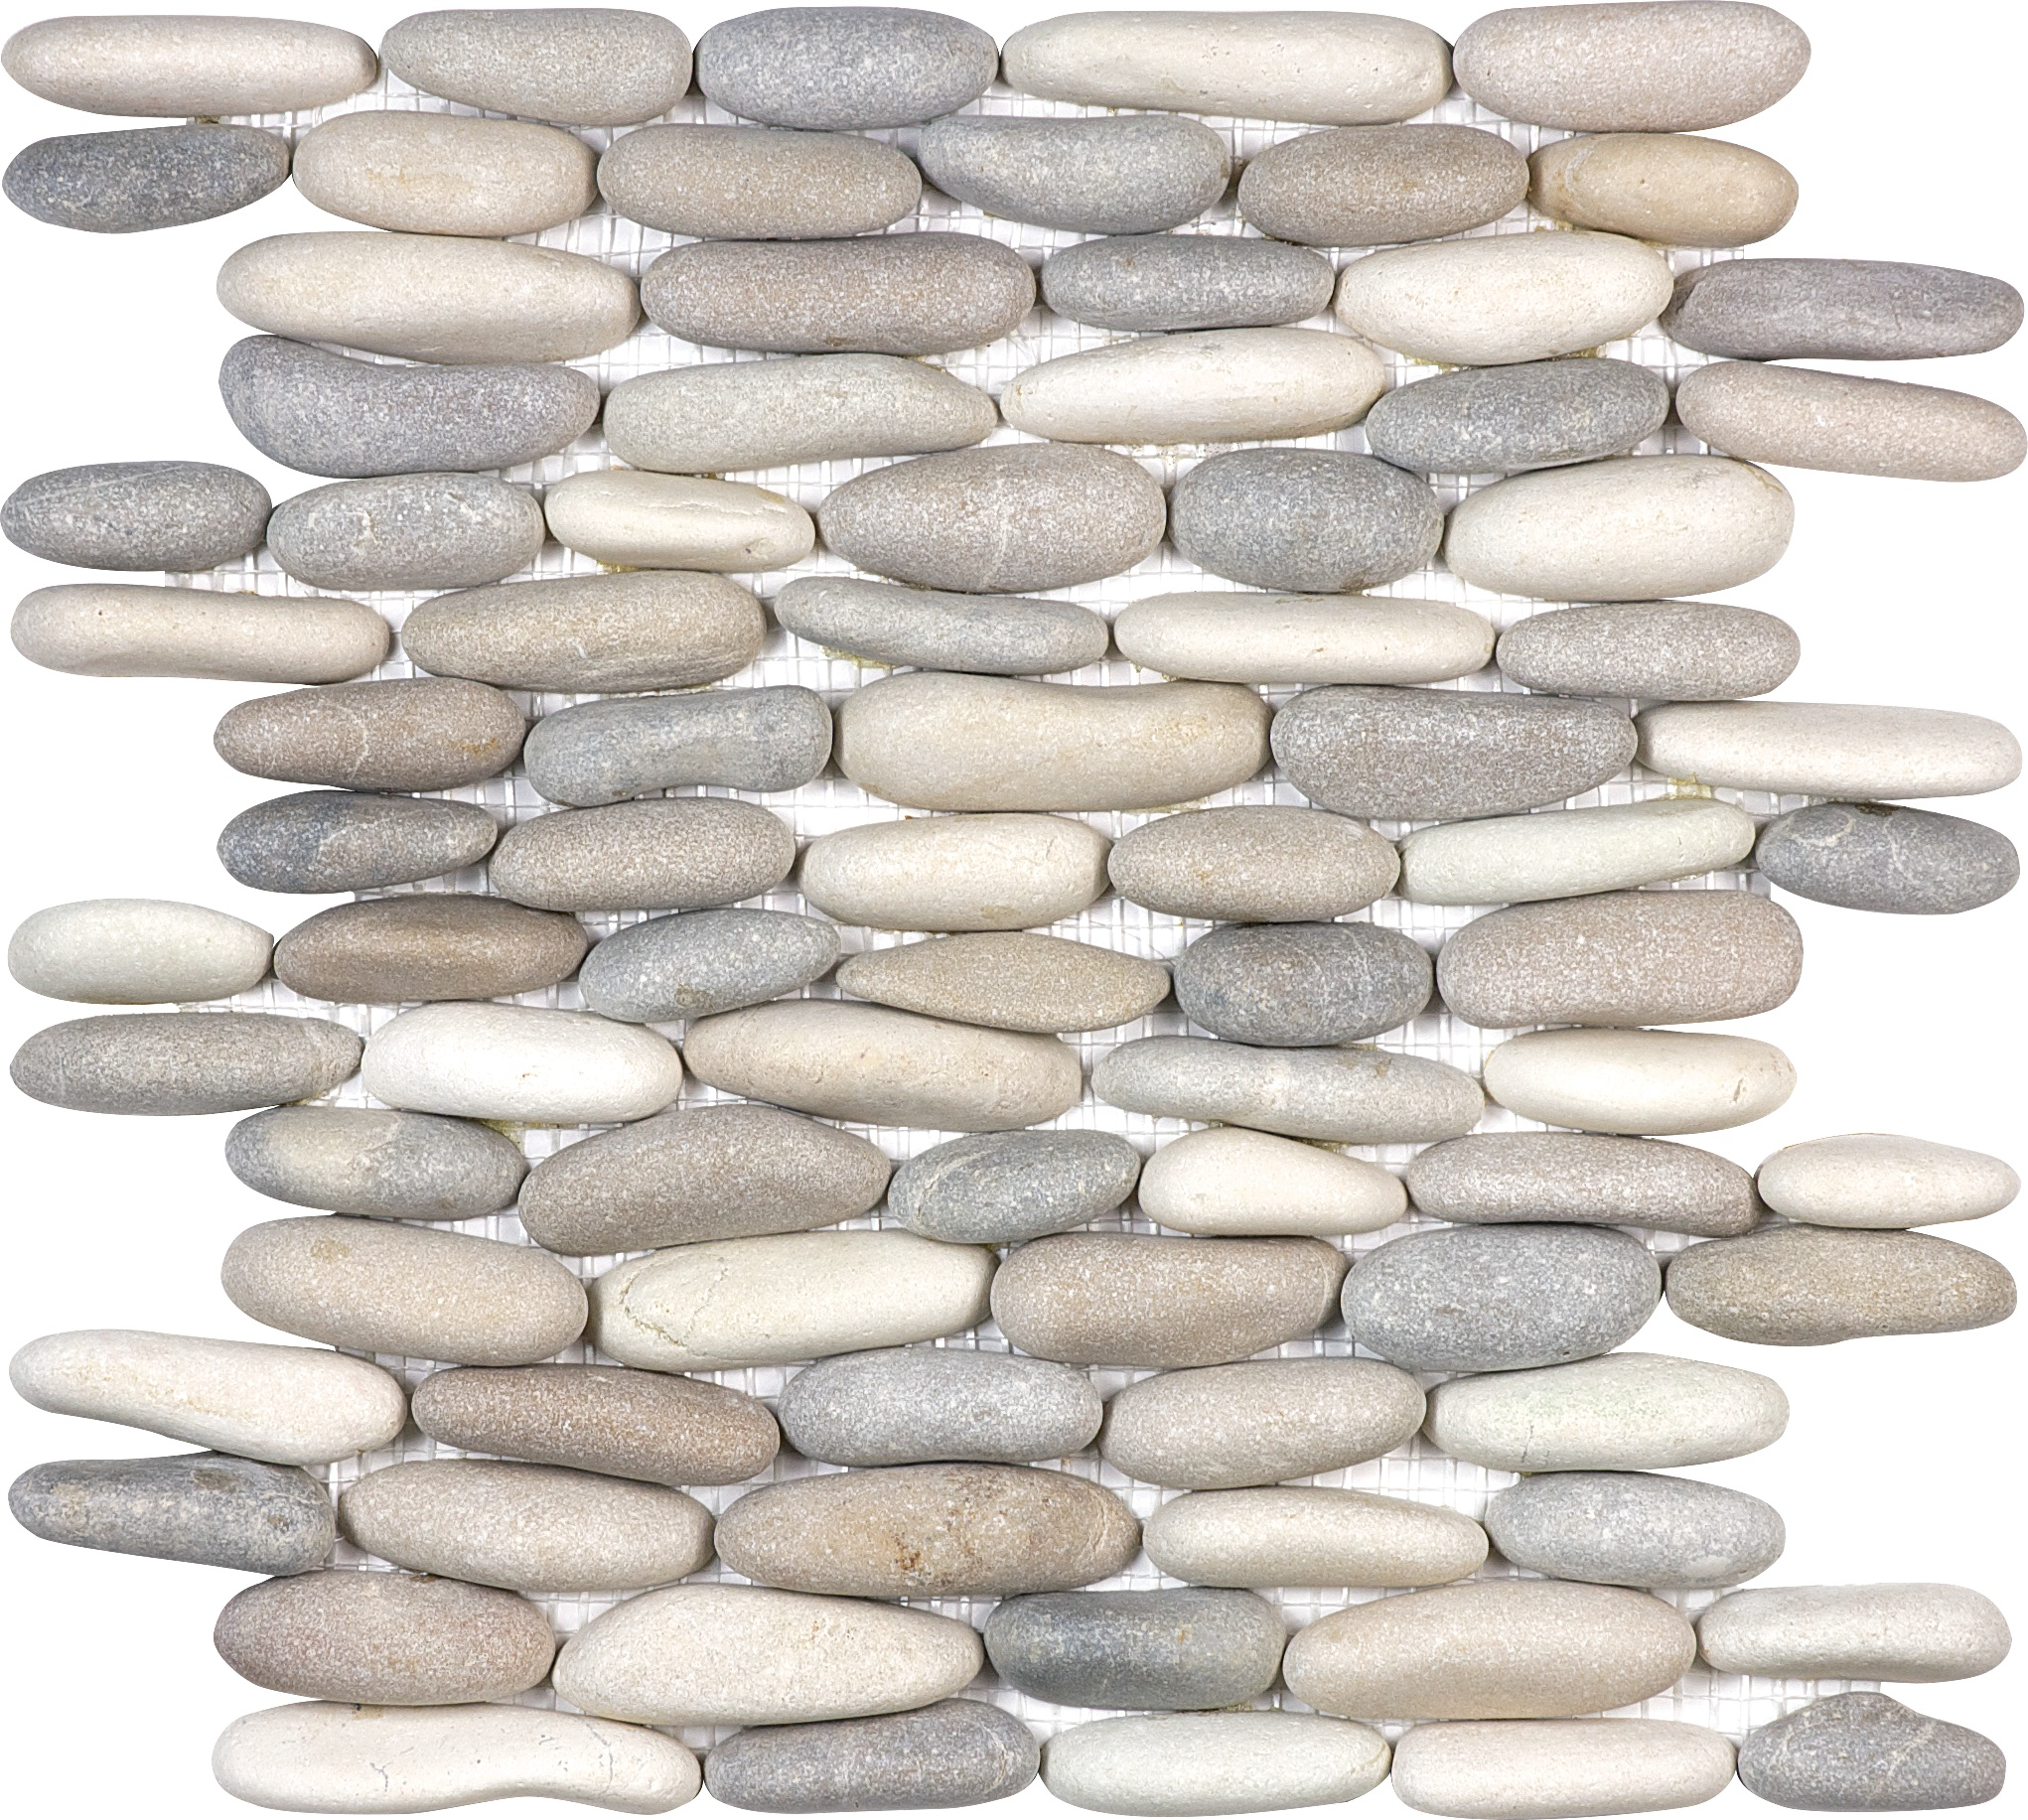 pebble harmony warm stacked pebble pattern natural stone wall mosaic stone blend blend from zen anatolia collection distributed by surface group international matte finish straight edge edge mesh shape